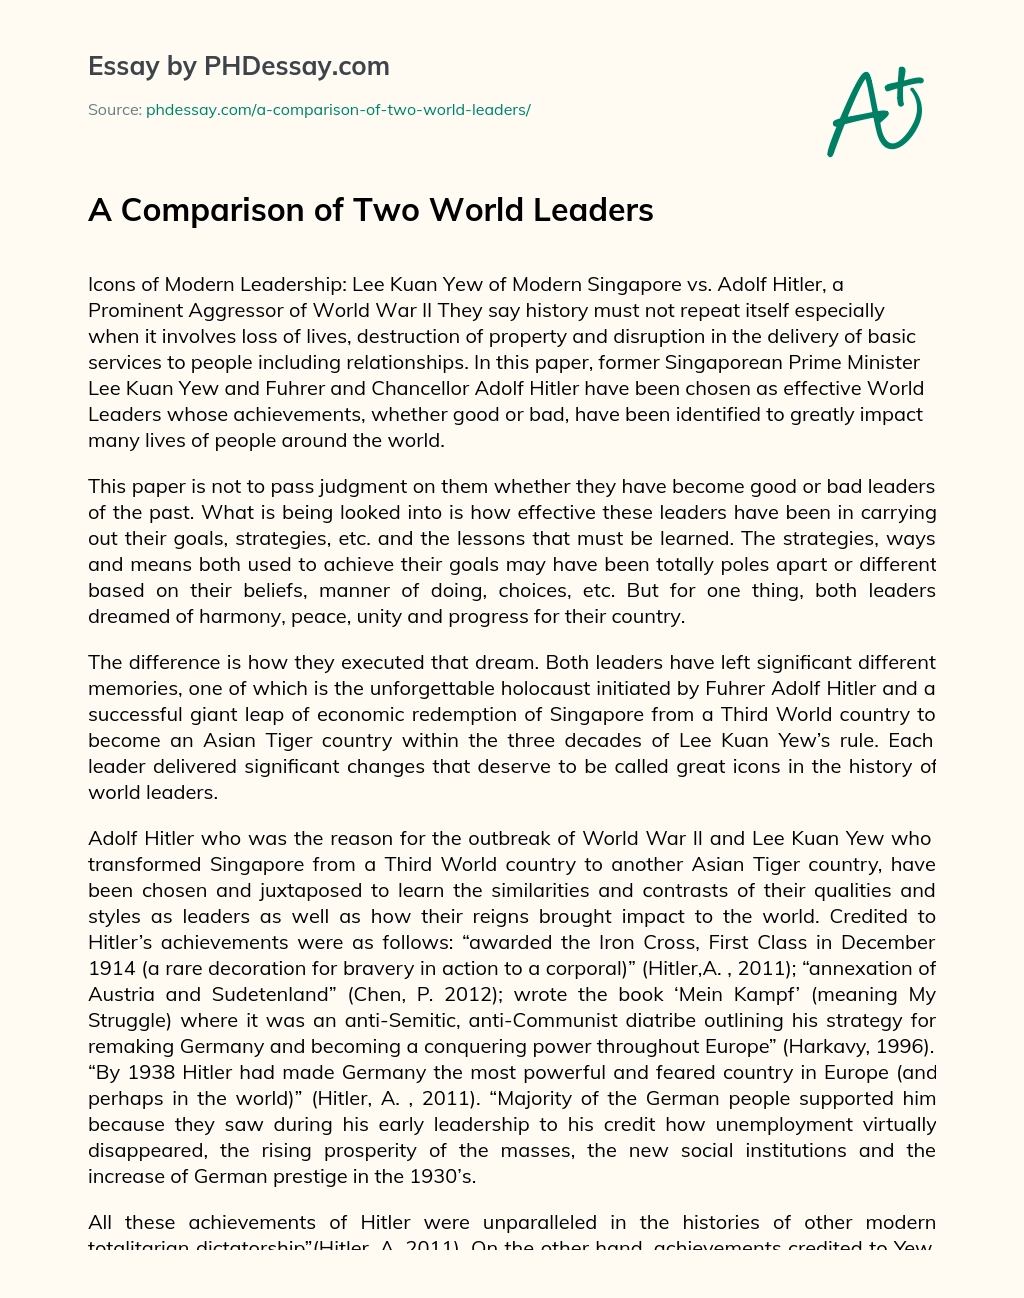 A Comparison of Two World Leaders essay